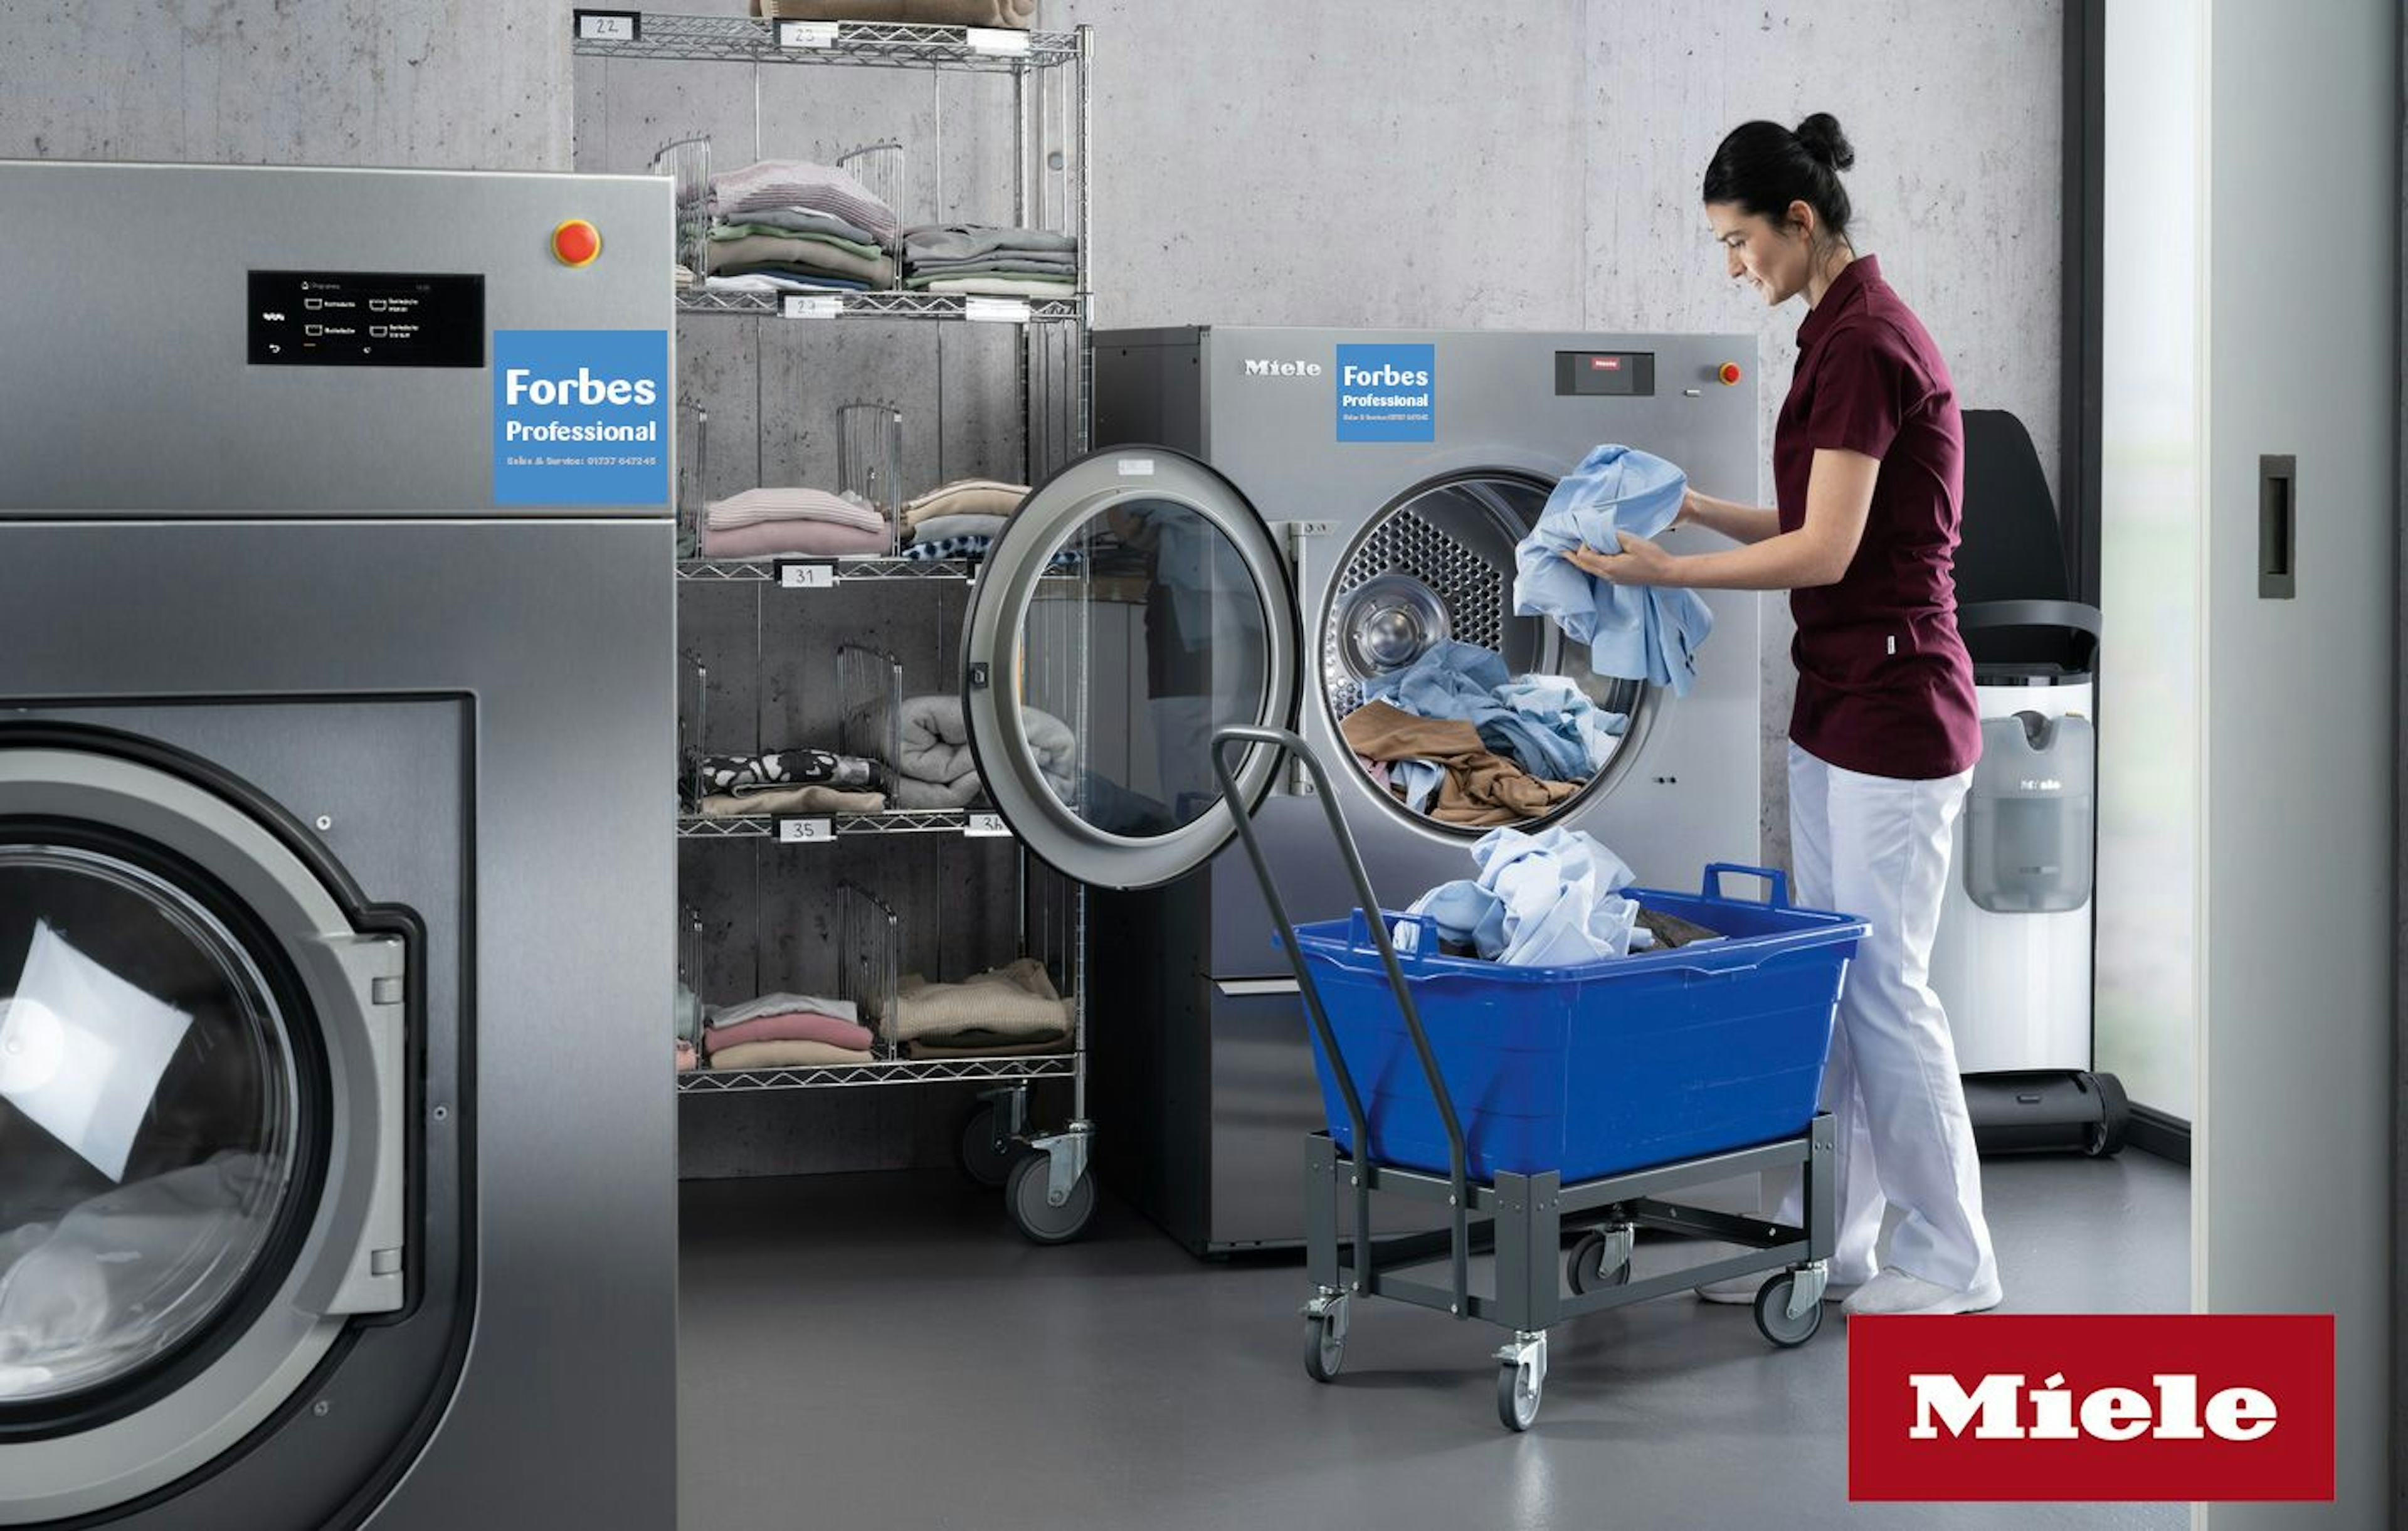 Miele laundry machines and commercial dishwashers awarded for their hygiene standards.